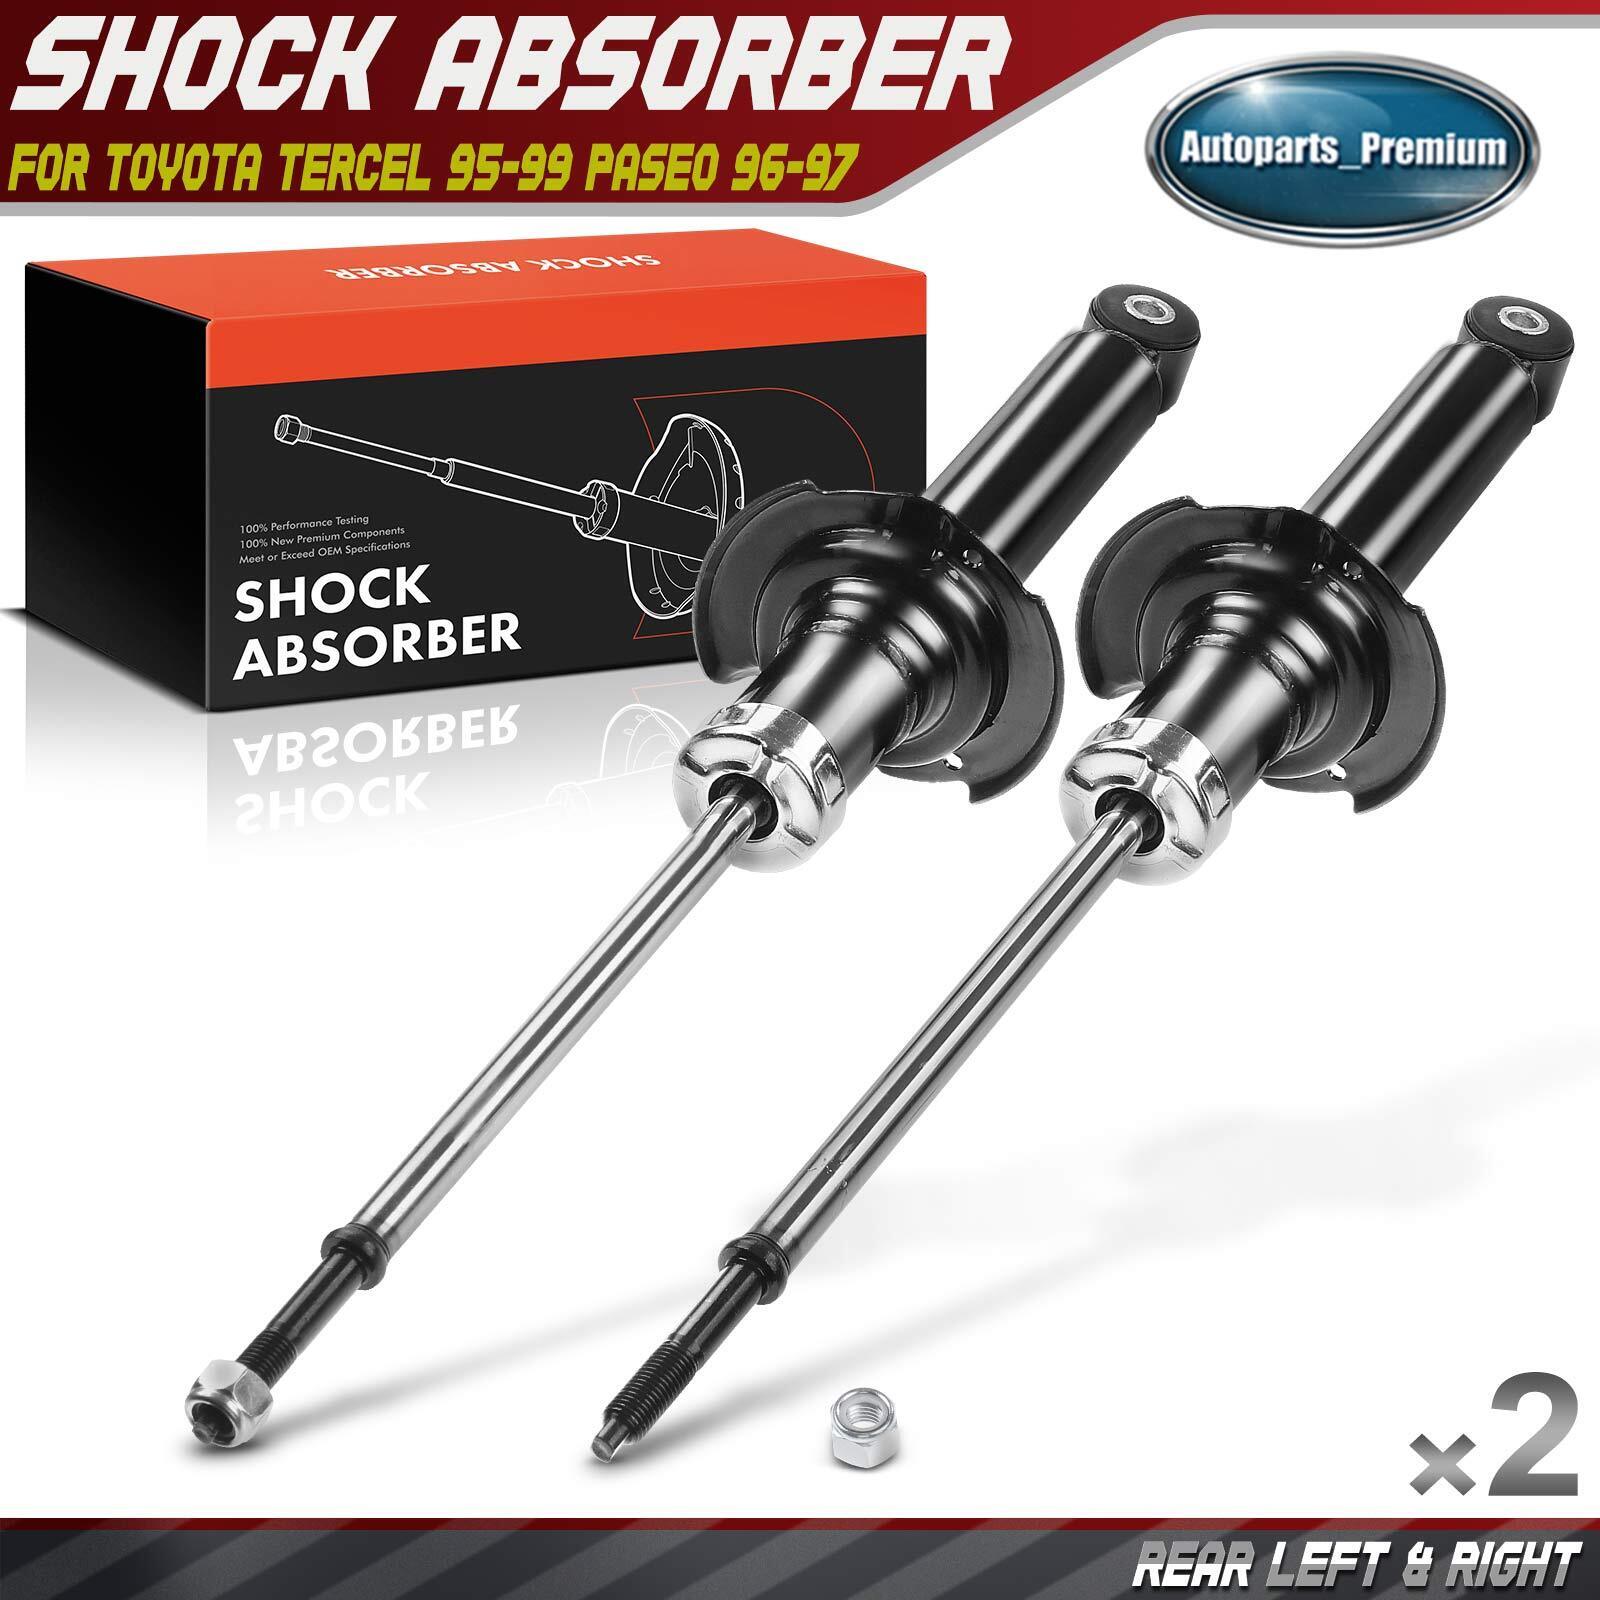 2x Rear Left & Right Shock Absorber for Toyota Tercel 1995-1999 Paseo 1996-1997